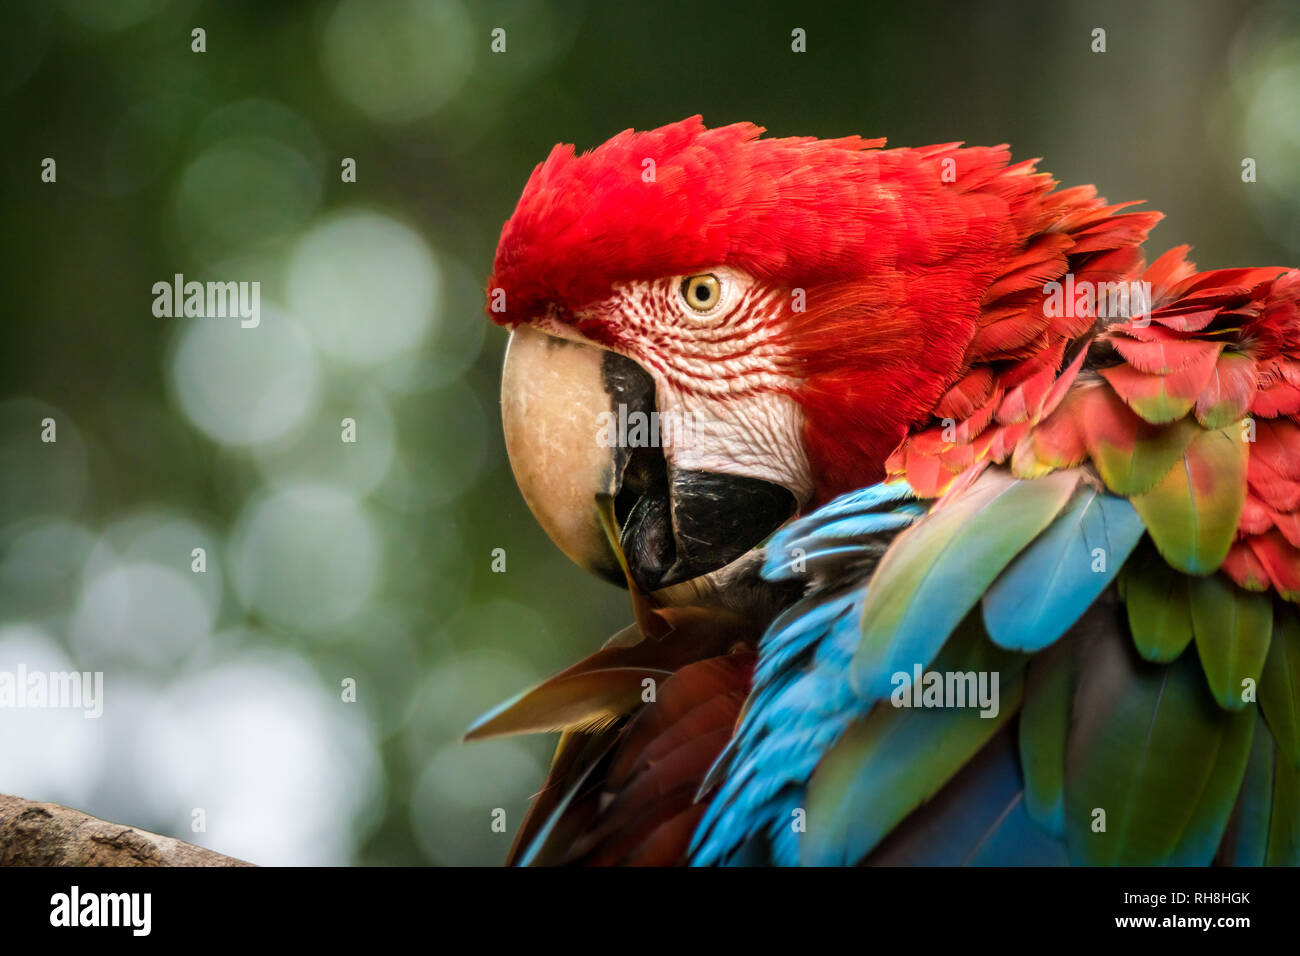 wonderful birds with it's colorful wings Stock Photo